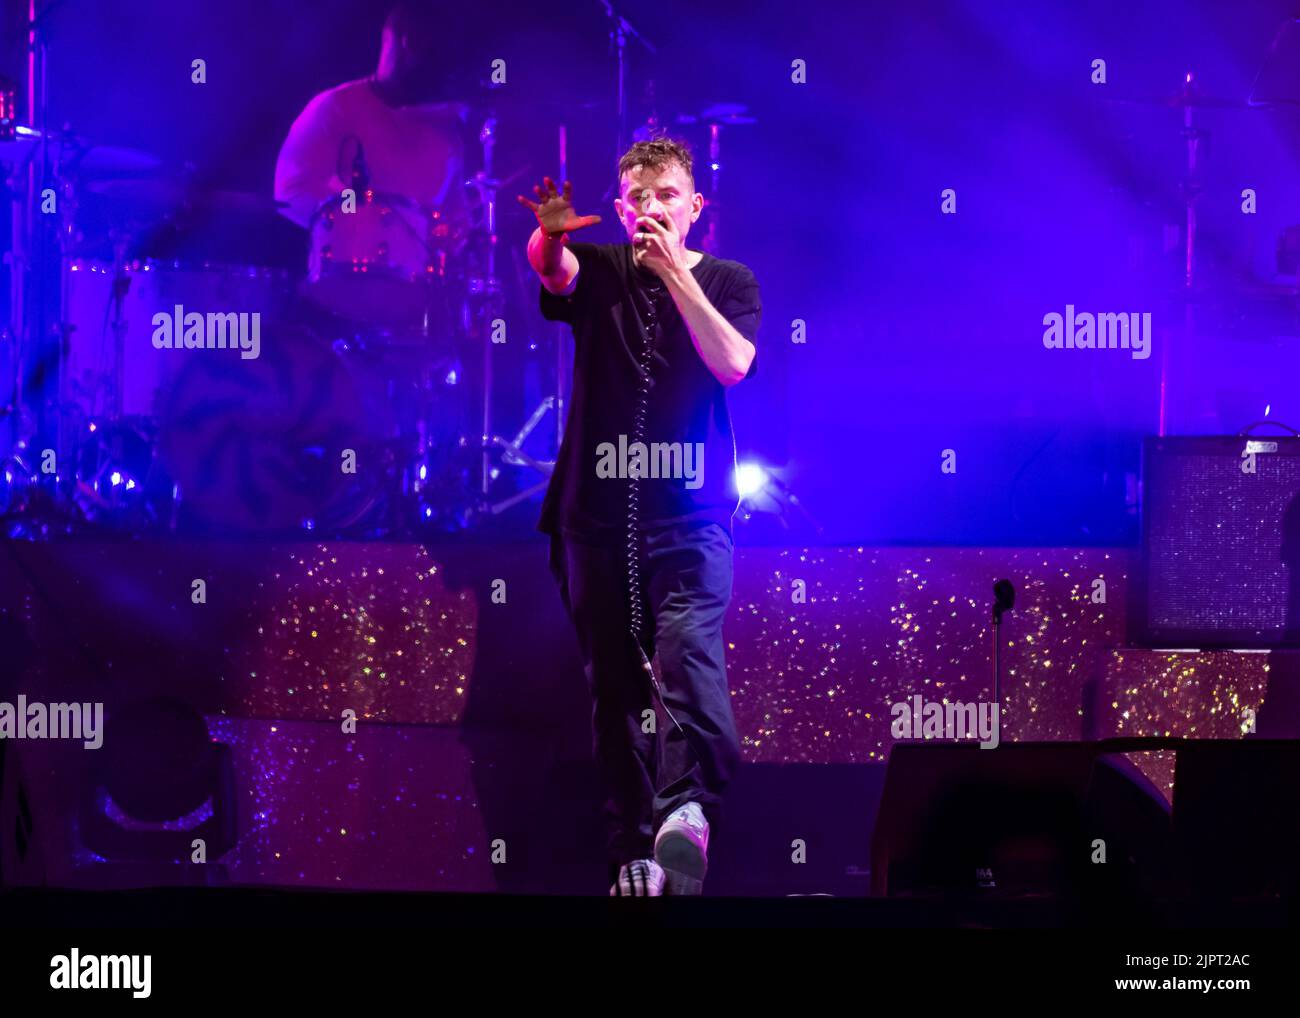 London, UK, Friday, 19th August 2022. Damon Albarn from Gorillaz performs live on stage as part of the All Points East Festival, Victoria Park, London.  Credit: DavidJensen / Empics Entertainment / Alamy Live News Stock Photo